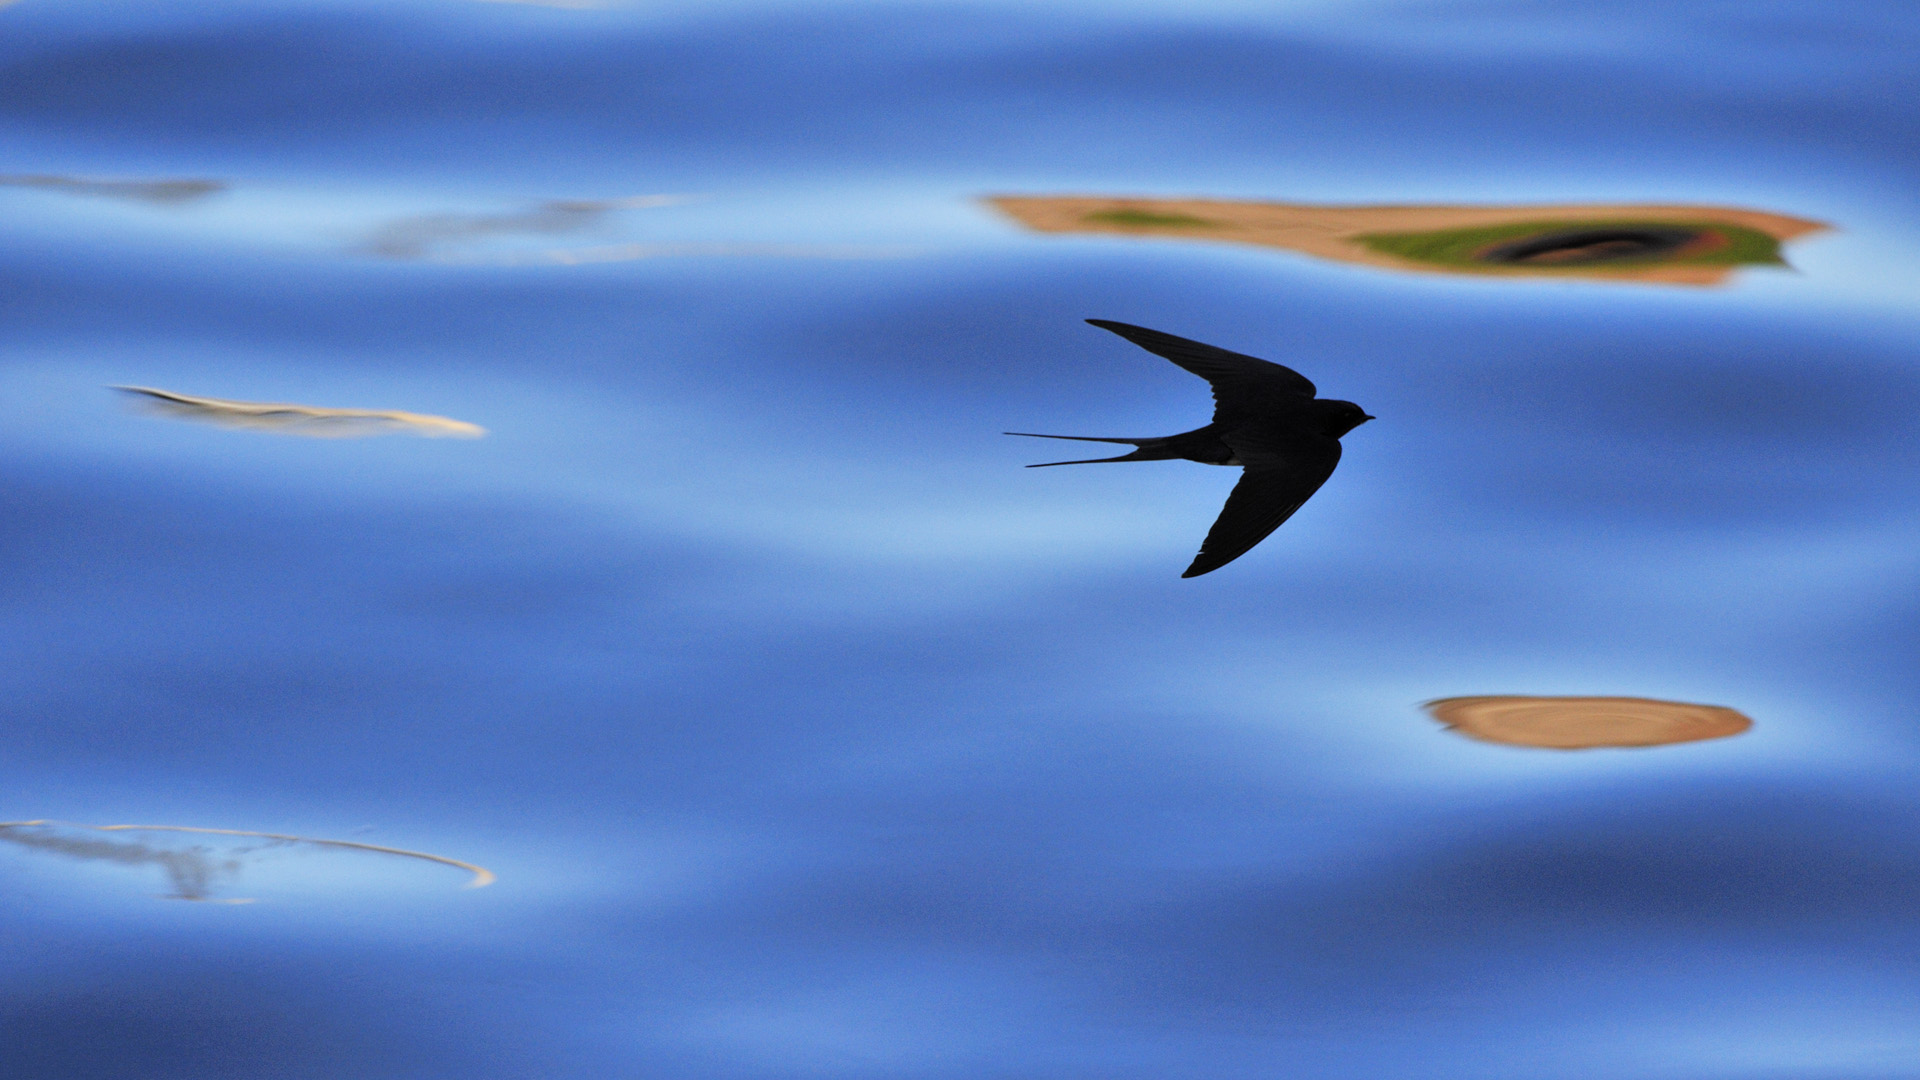 Smart swallow scenery, animals, 1920x1080 HD Wallpaper and FREE ...